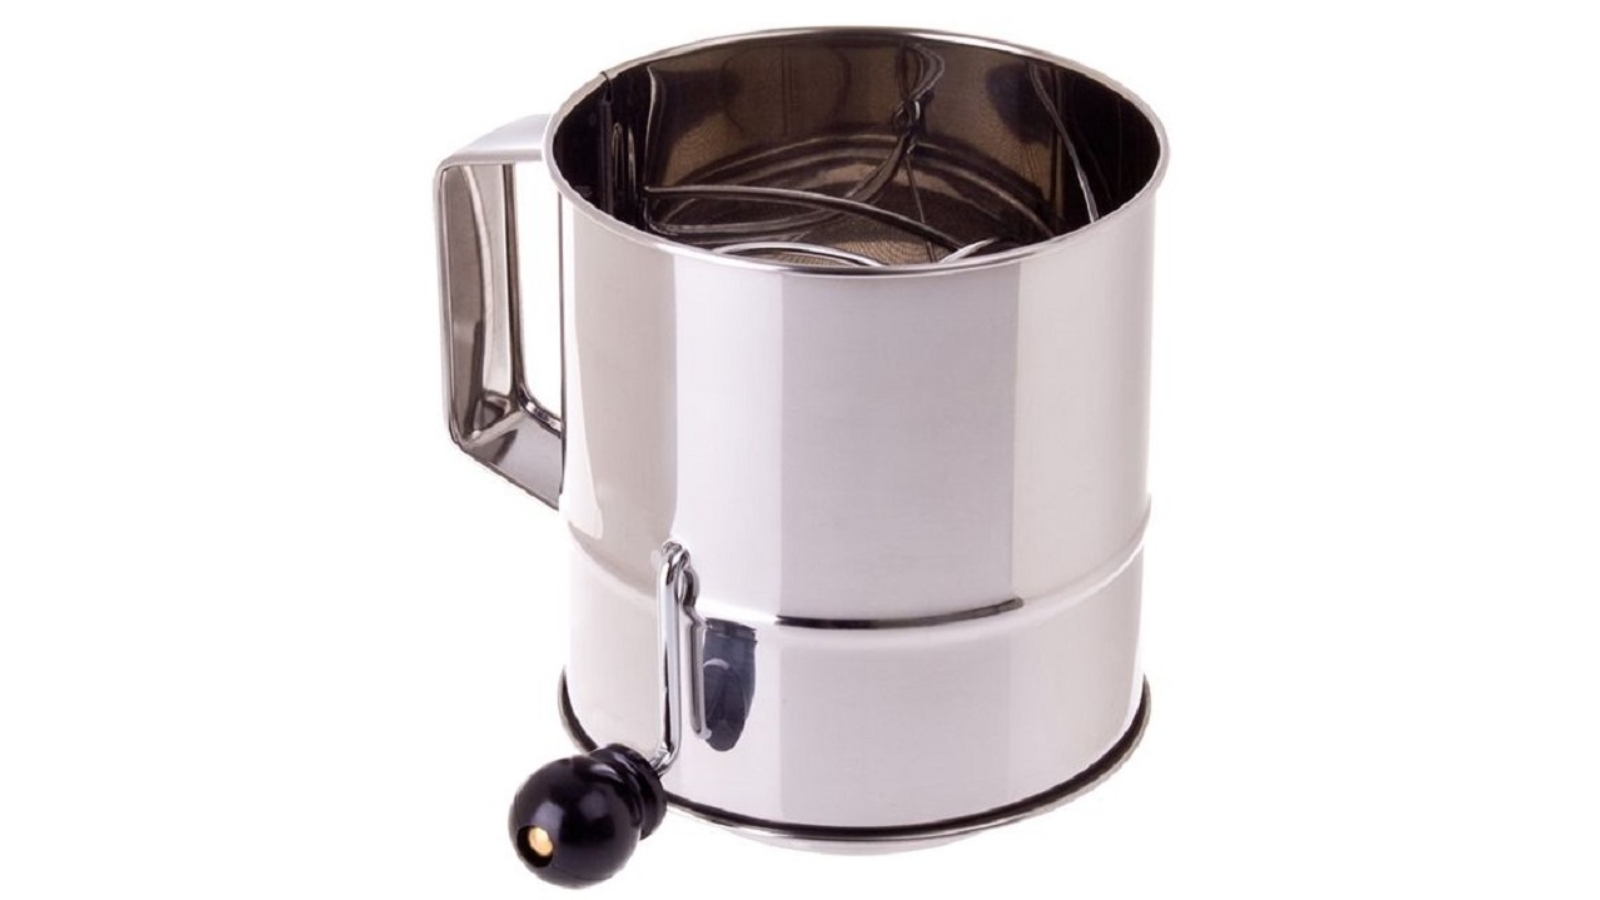 APPETITO BATTERY OPERATED 4 CUP FLOUR SIFTER - WHITE